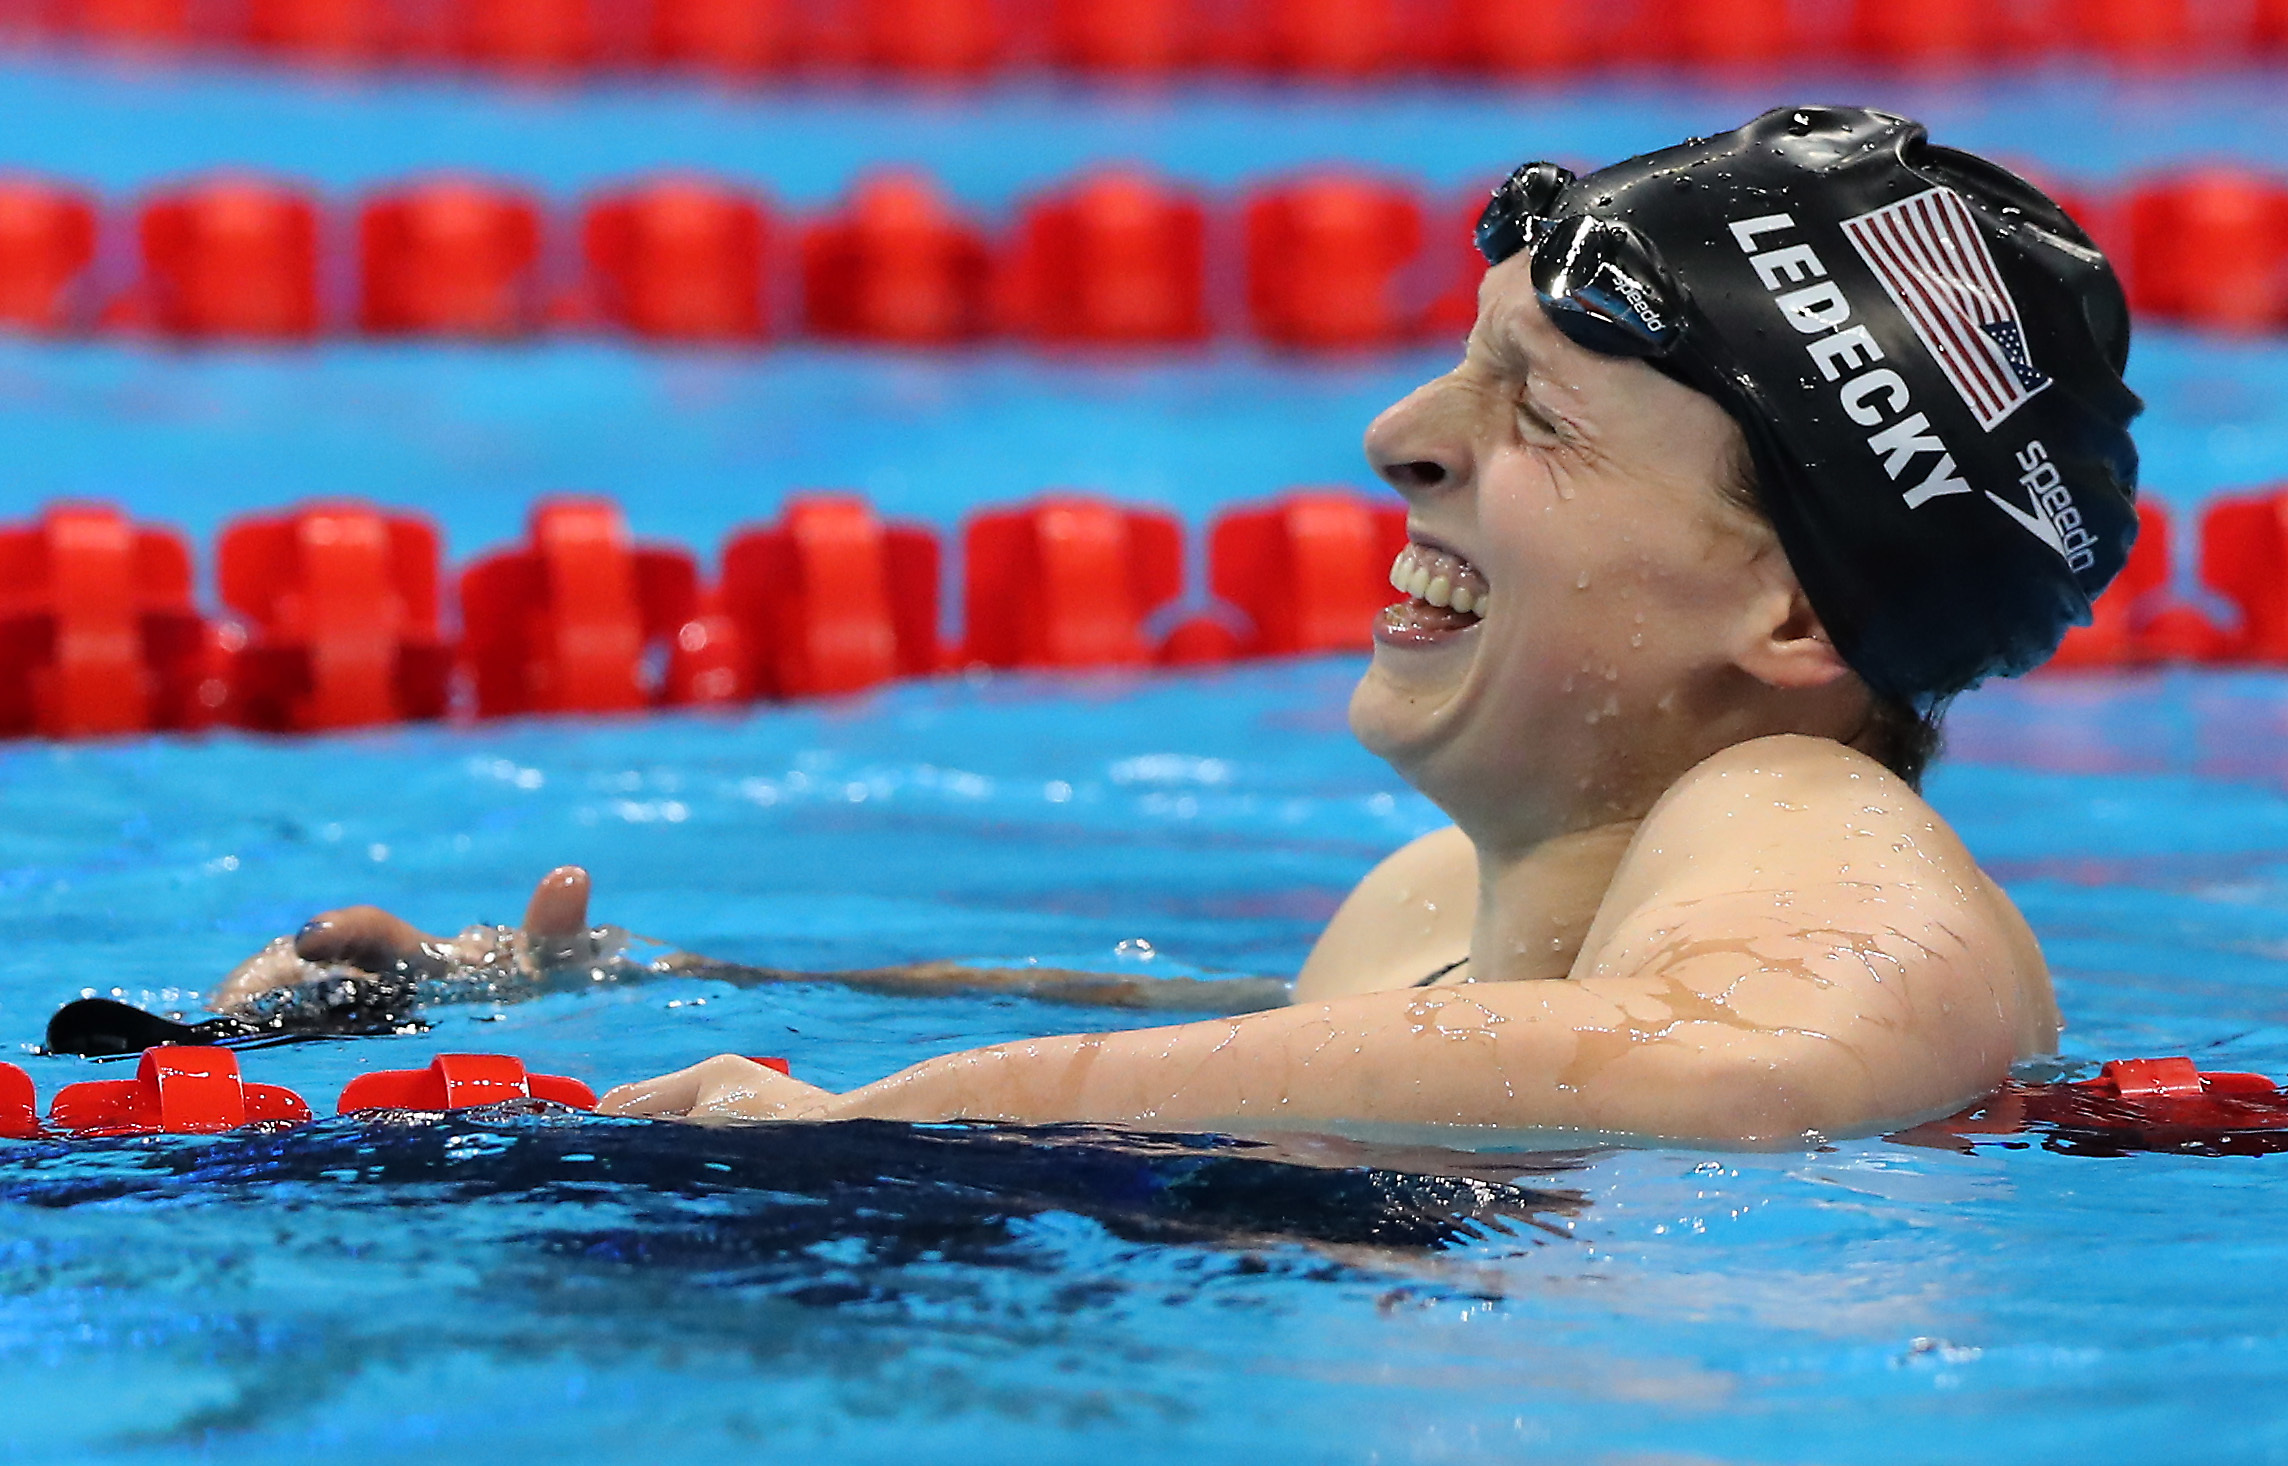 Katie Ledecky breaks world record, takes gold in 800meter freestyle